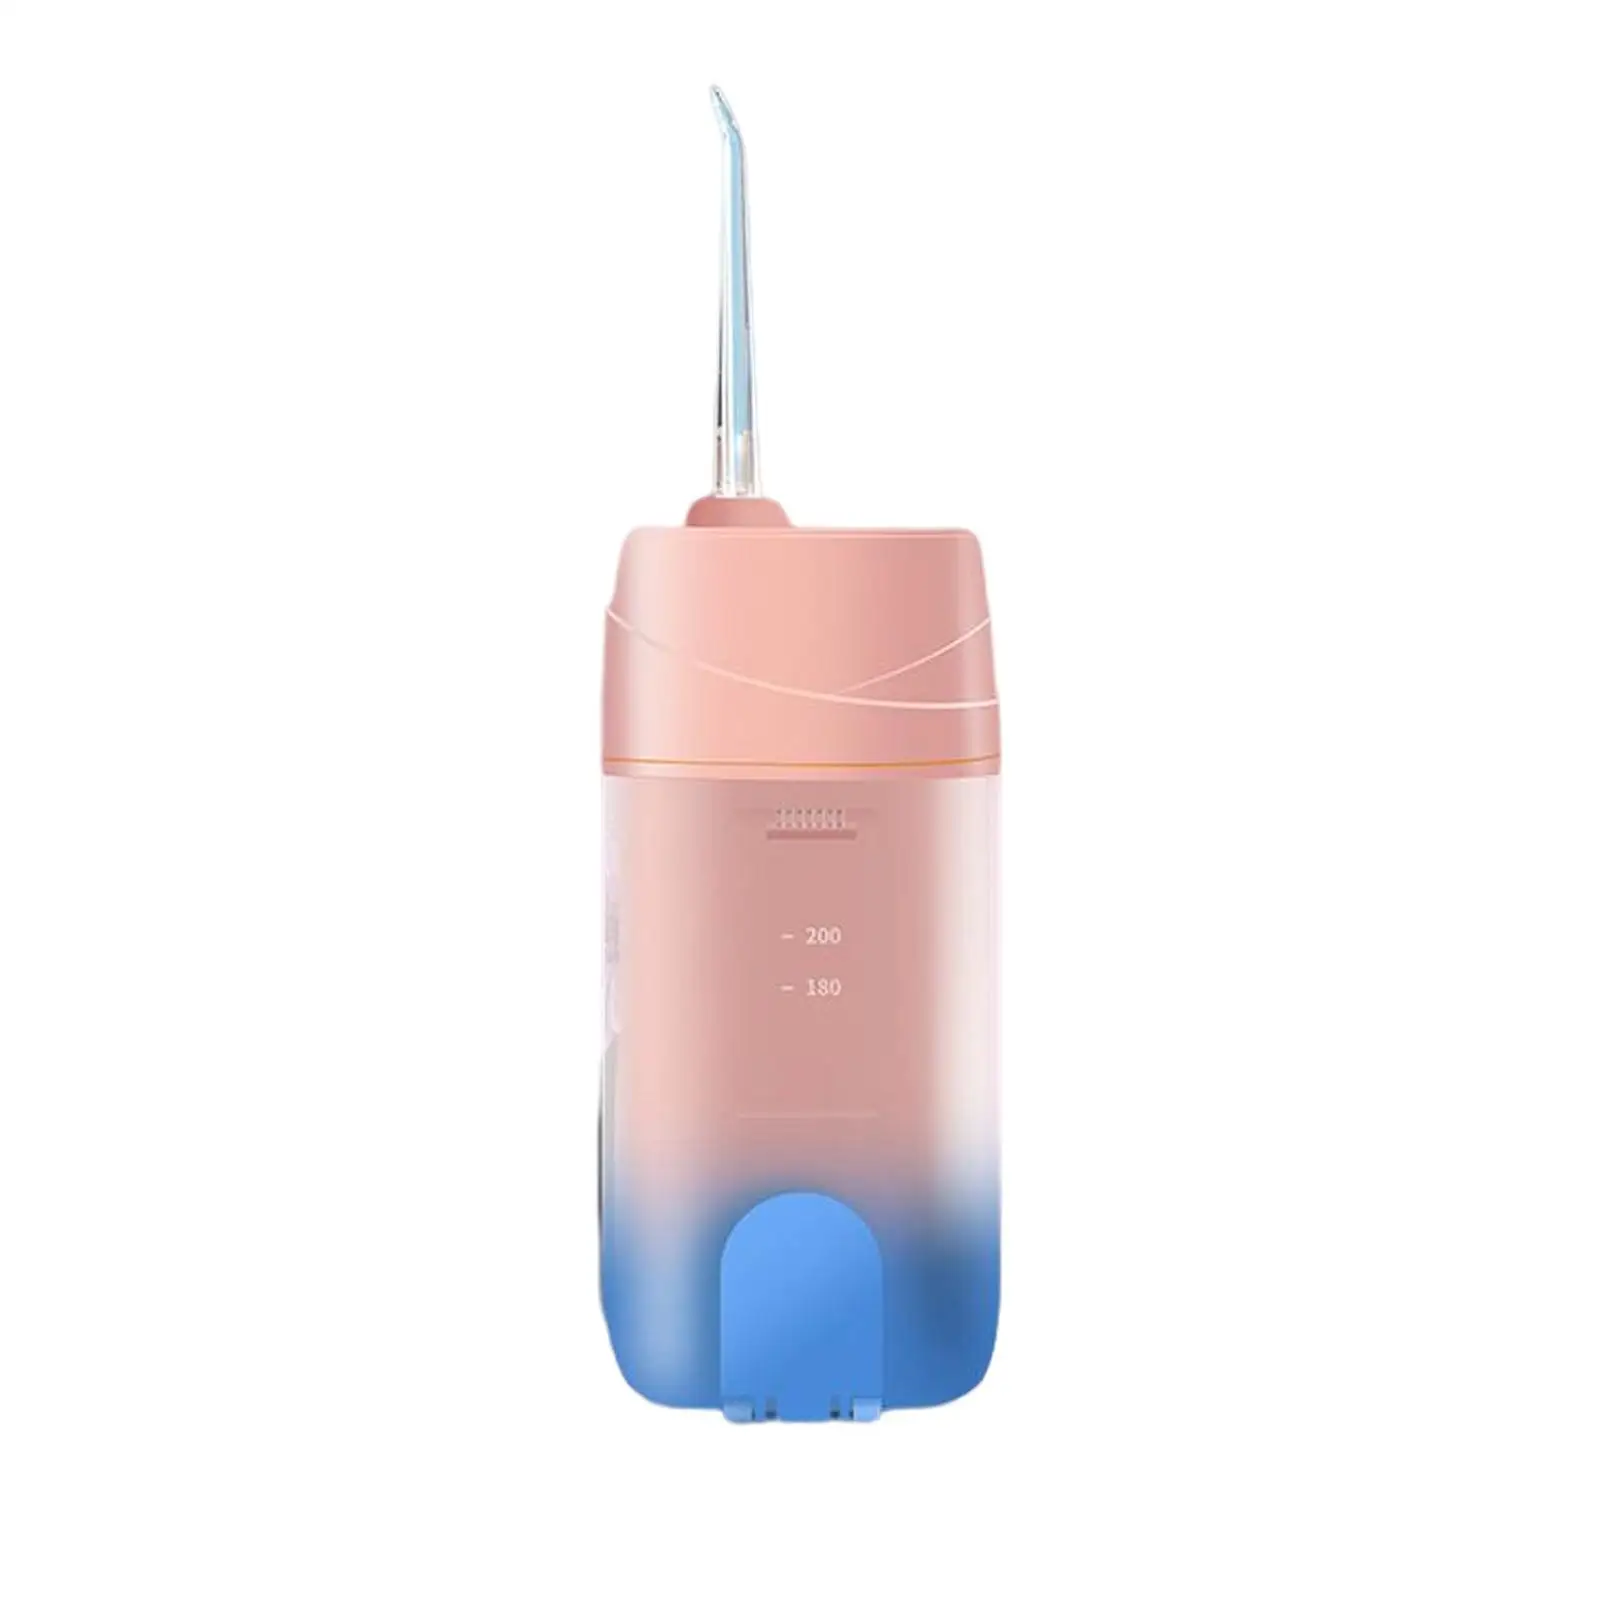 Compact Oral Irrigator Waterproof 200ml Oral Flossing Irrigator with 3 Modes Rechargeable IPX7 , Bathroom, Home,